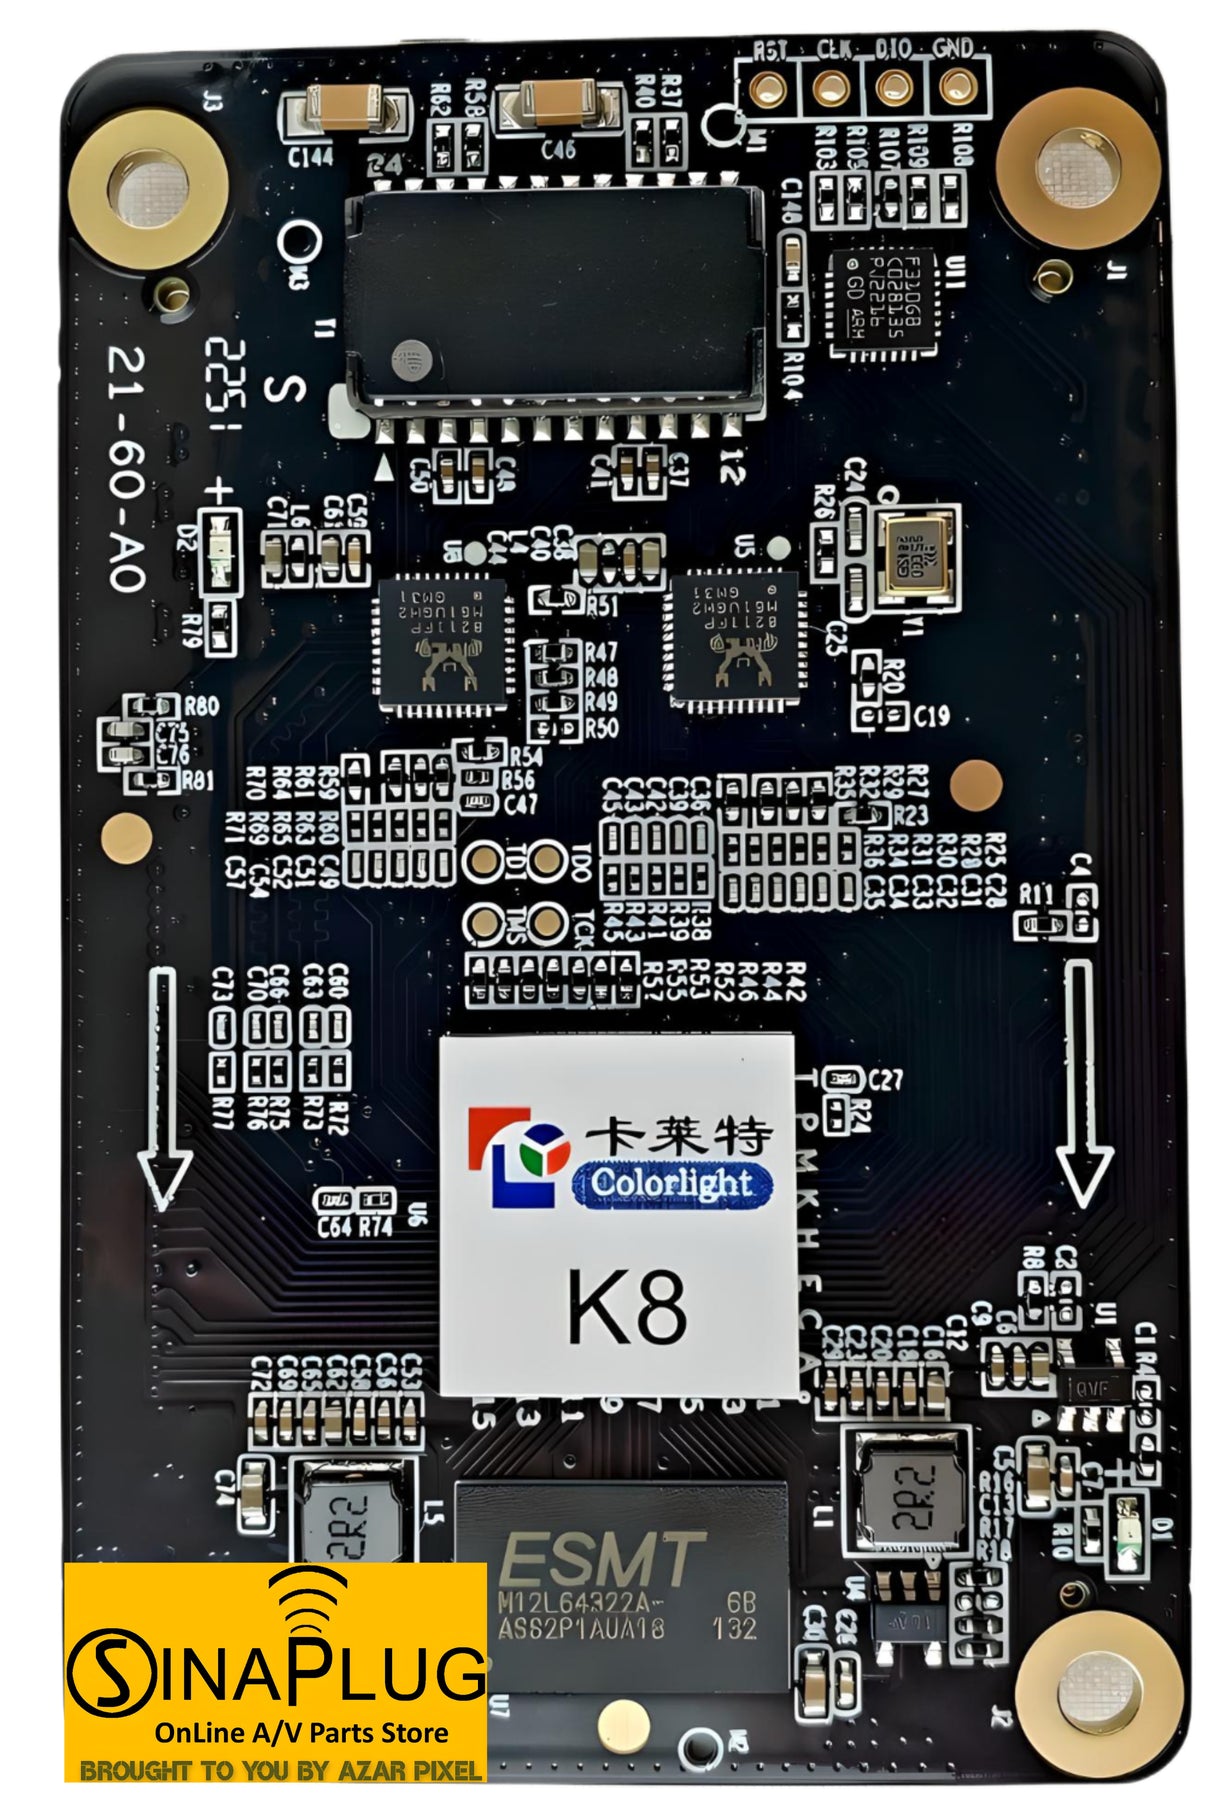 Colorlight K8 LED receiving card